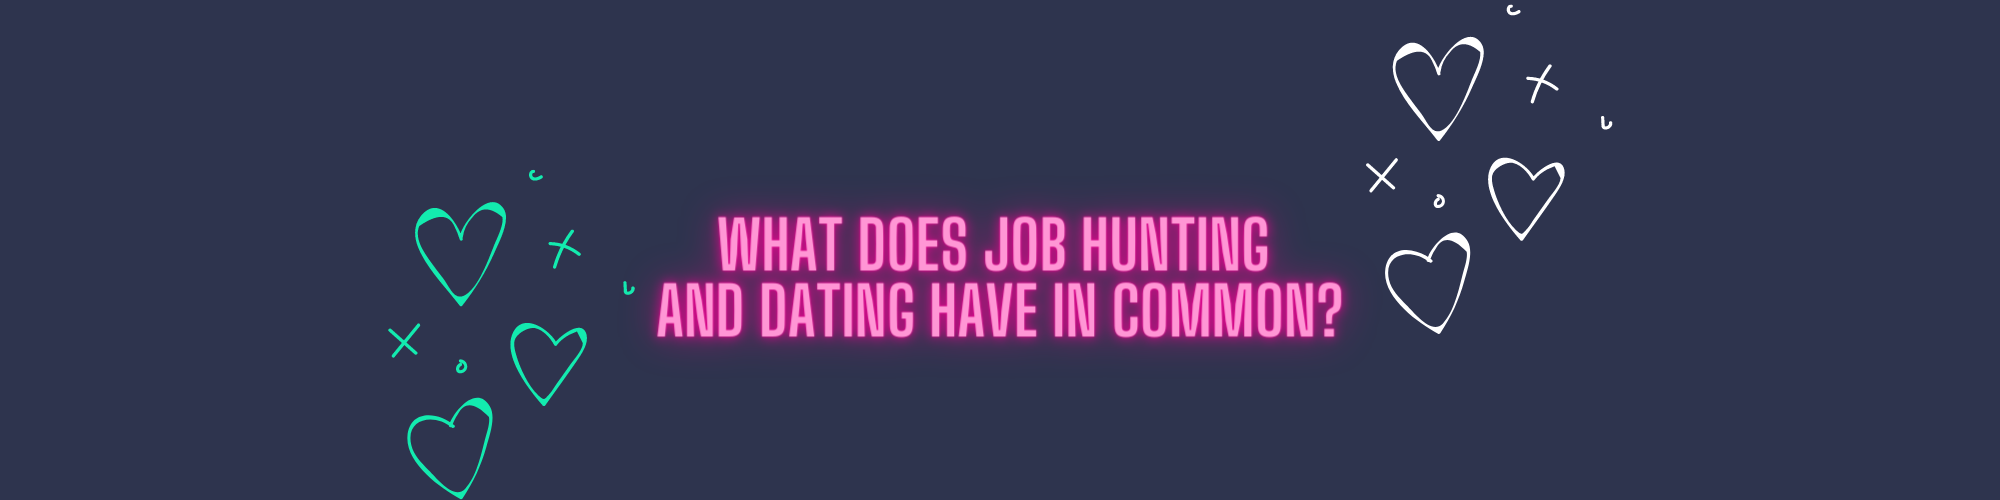 What Does Job Hunting and Dating Have In Common?